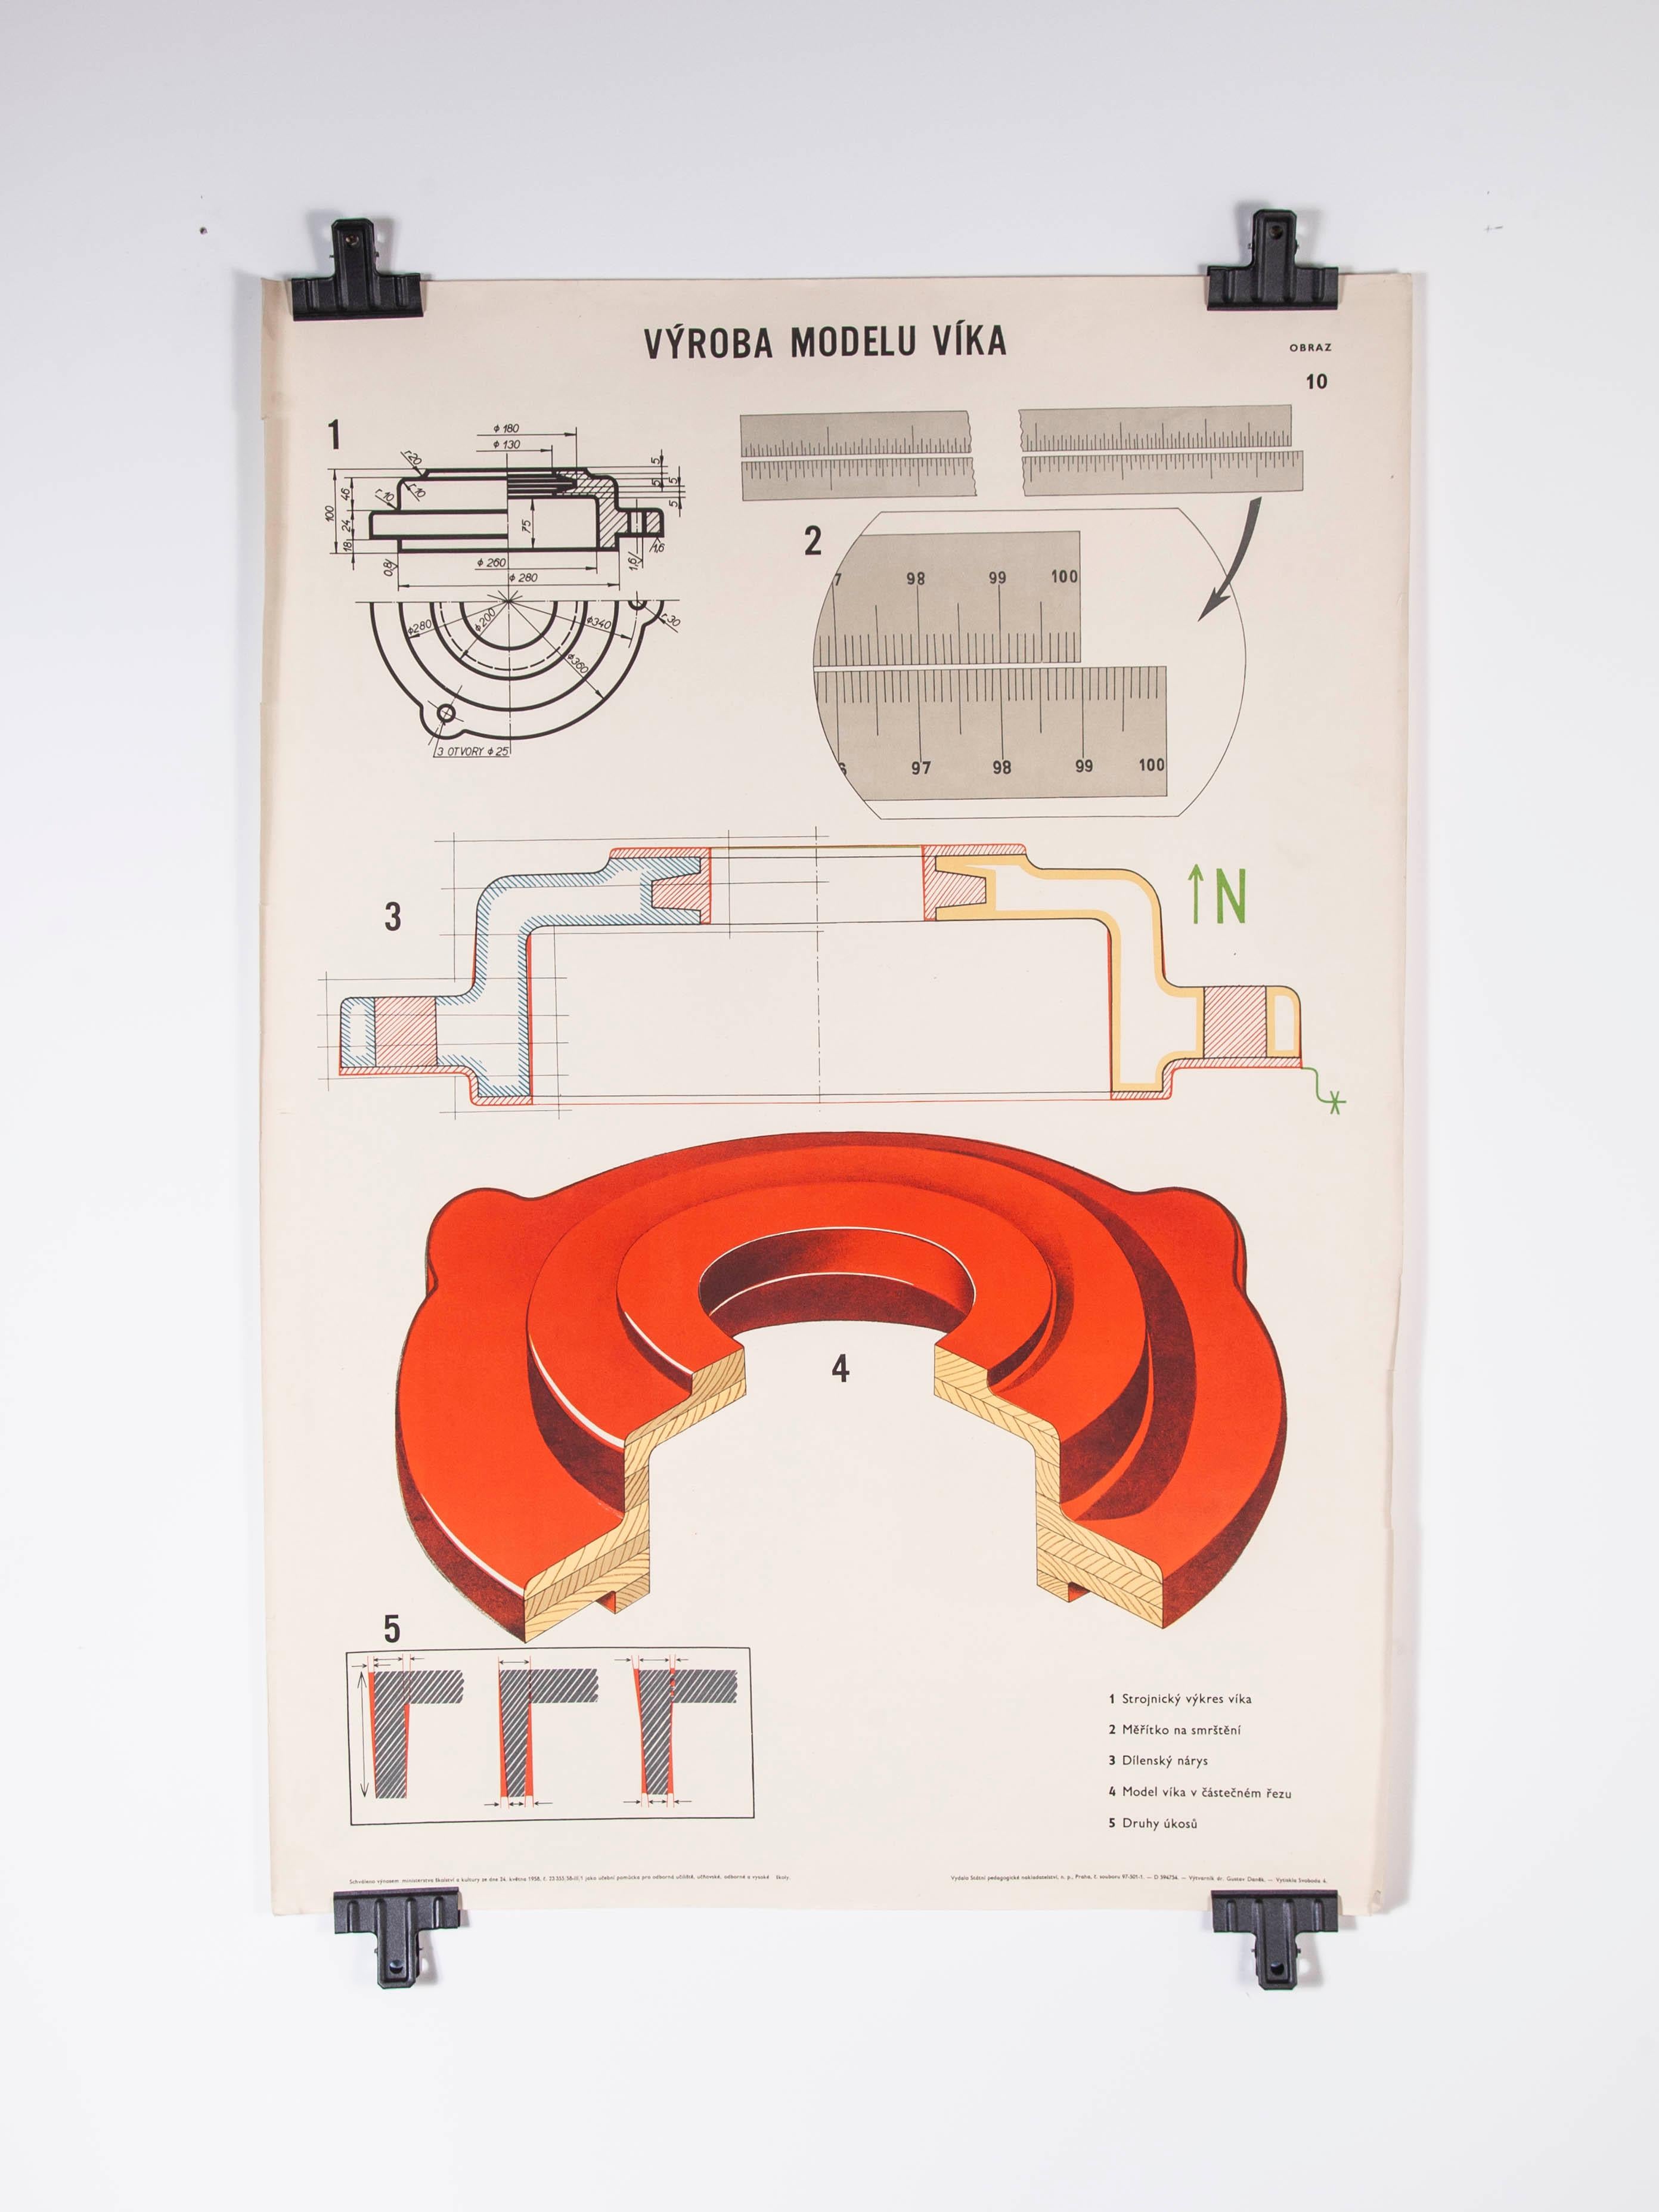 Czech technical industrial drawing – foundry mould engineering poster – 9

Sourced from an old engineering workshop in the Czech Republic, an amazing series of technical Industrial drawings explaining the process of sand casting and creating the